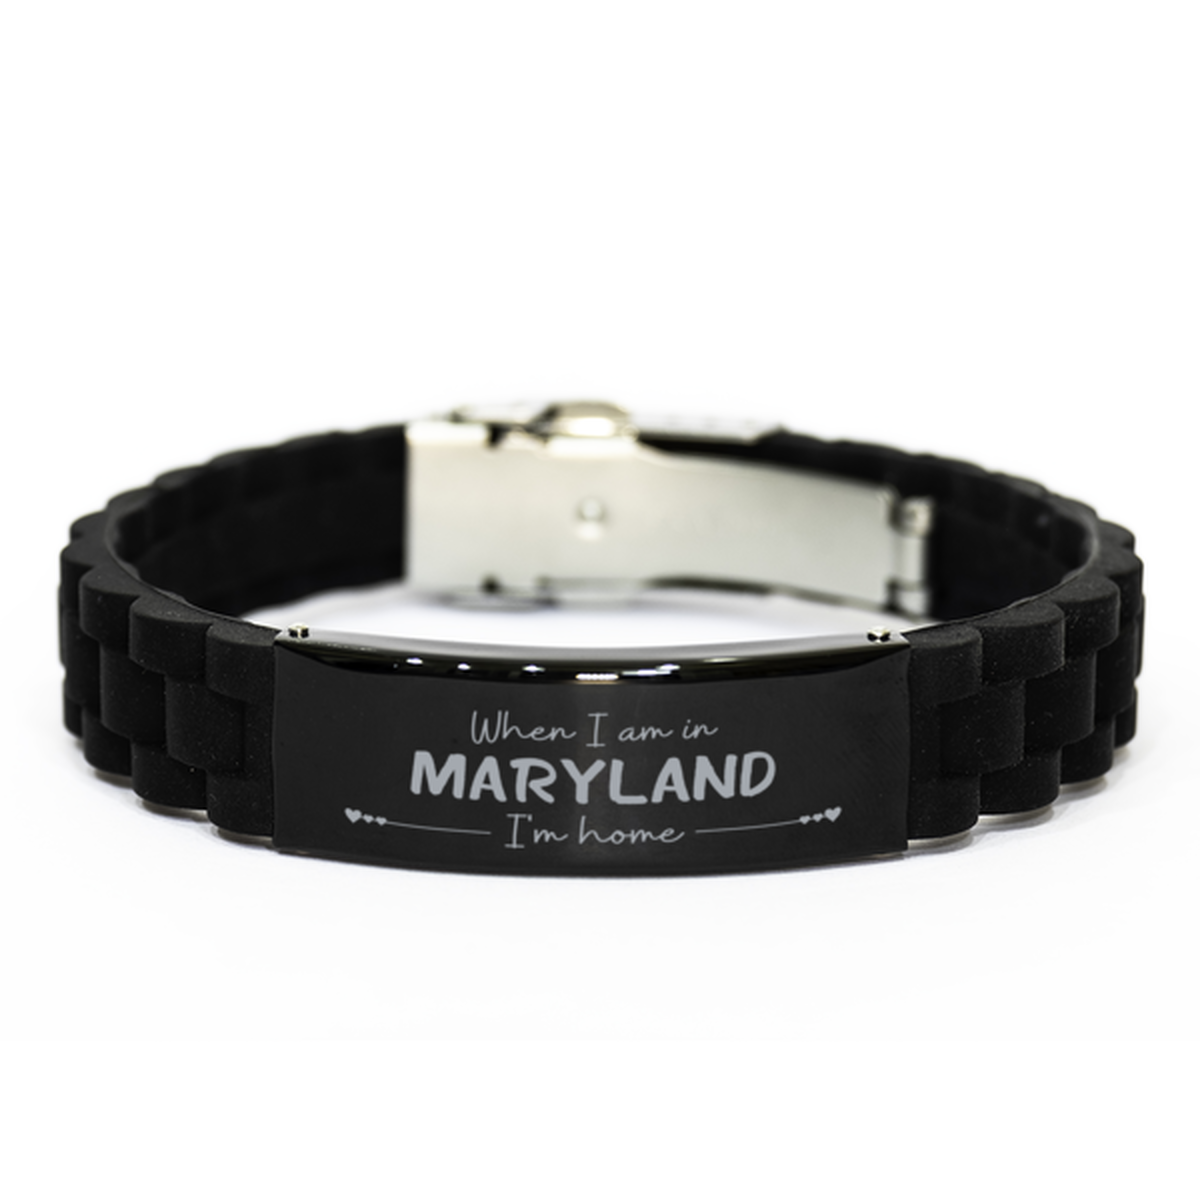 When I am in Maryland I'm home Black Glidelock Clasp Bracelet, Cheap Gifts For Maryland, State Maryland Birthday Gifts for Friends Coworker